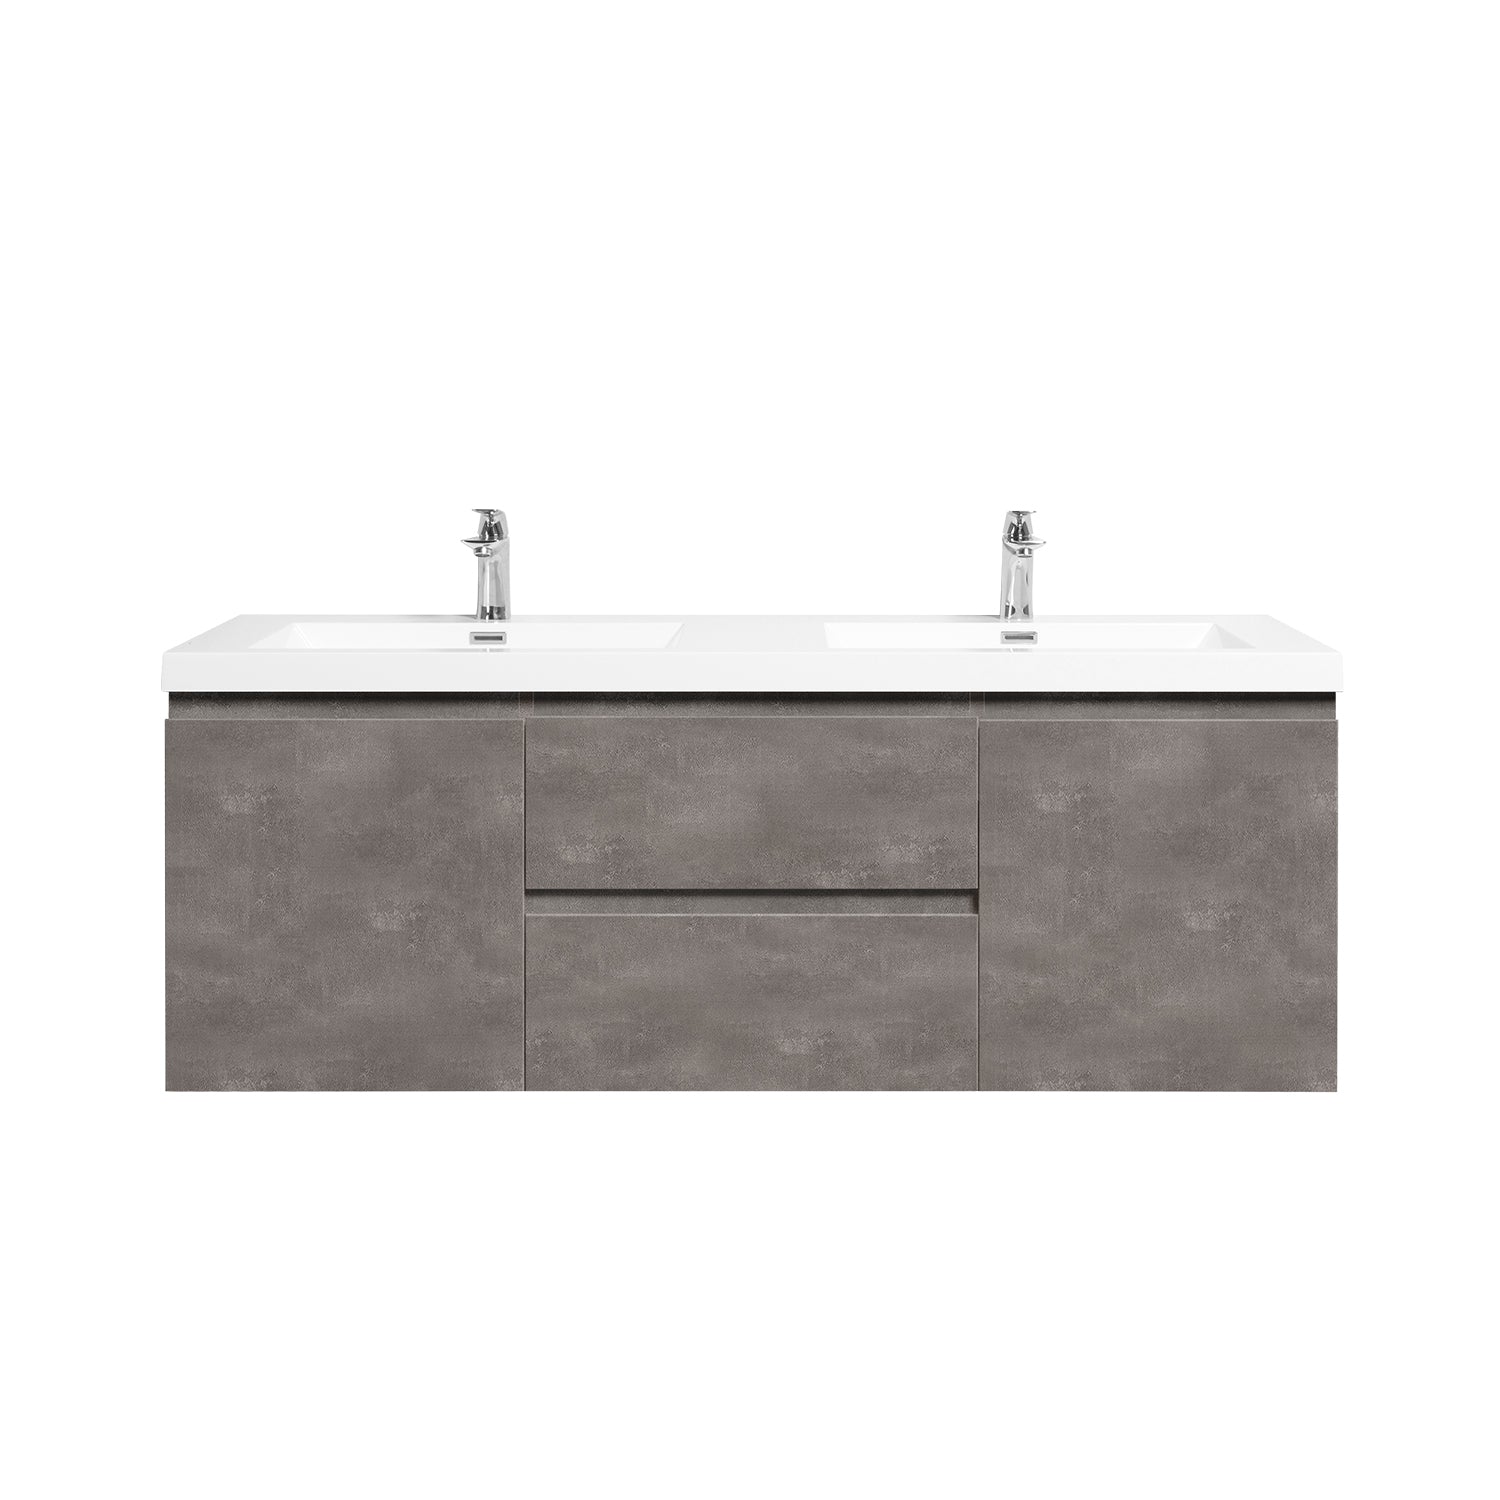 Sinber 60" Wall Mounted Double Rectangular Sink Bathroom Vanity Cabinet with White Acrylic Countertop 2 Doors and 2 Drawers, Compact and Elegant with Sleek Design for Modern Bathrooms